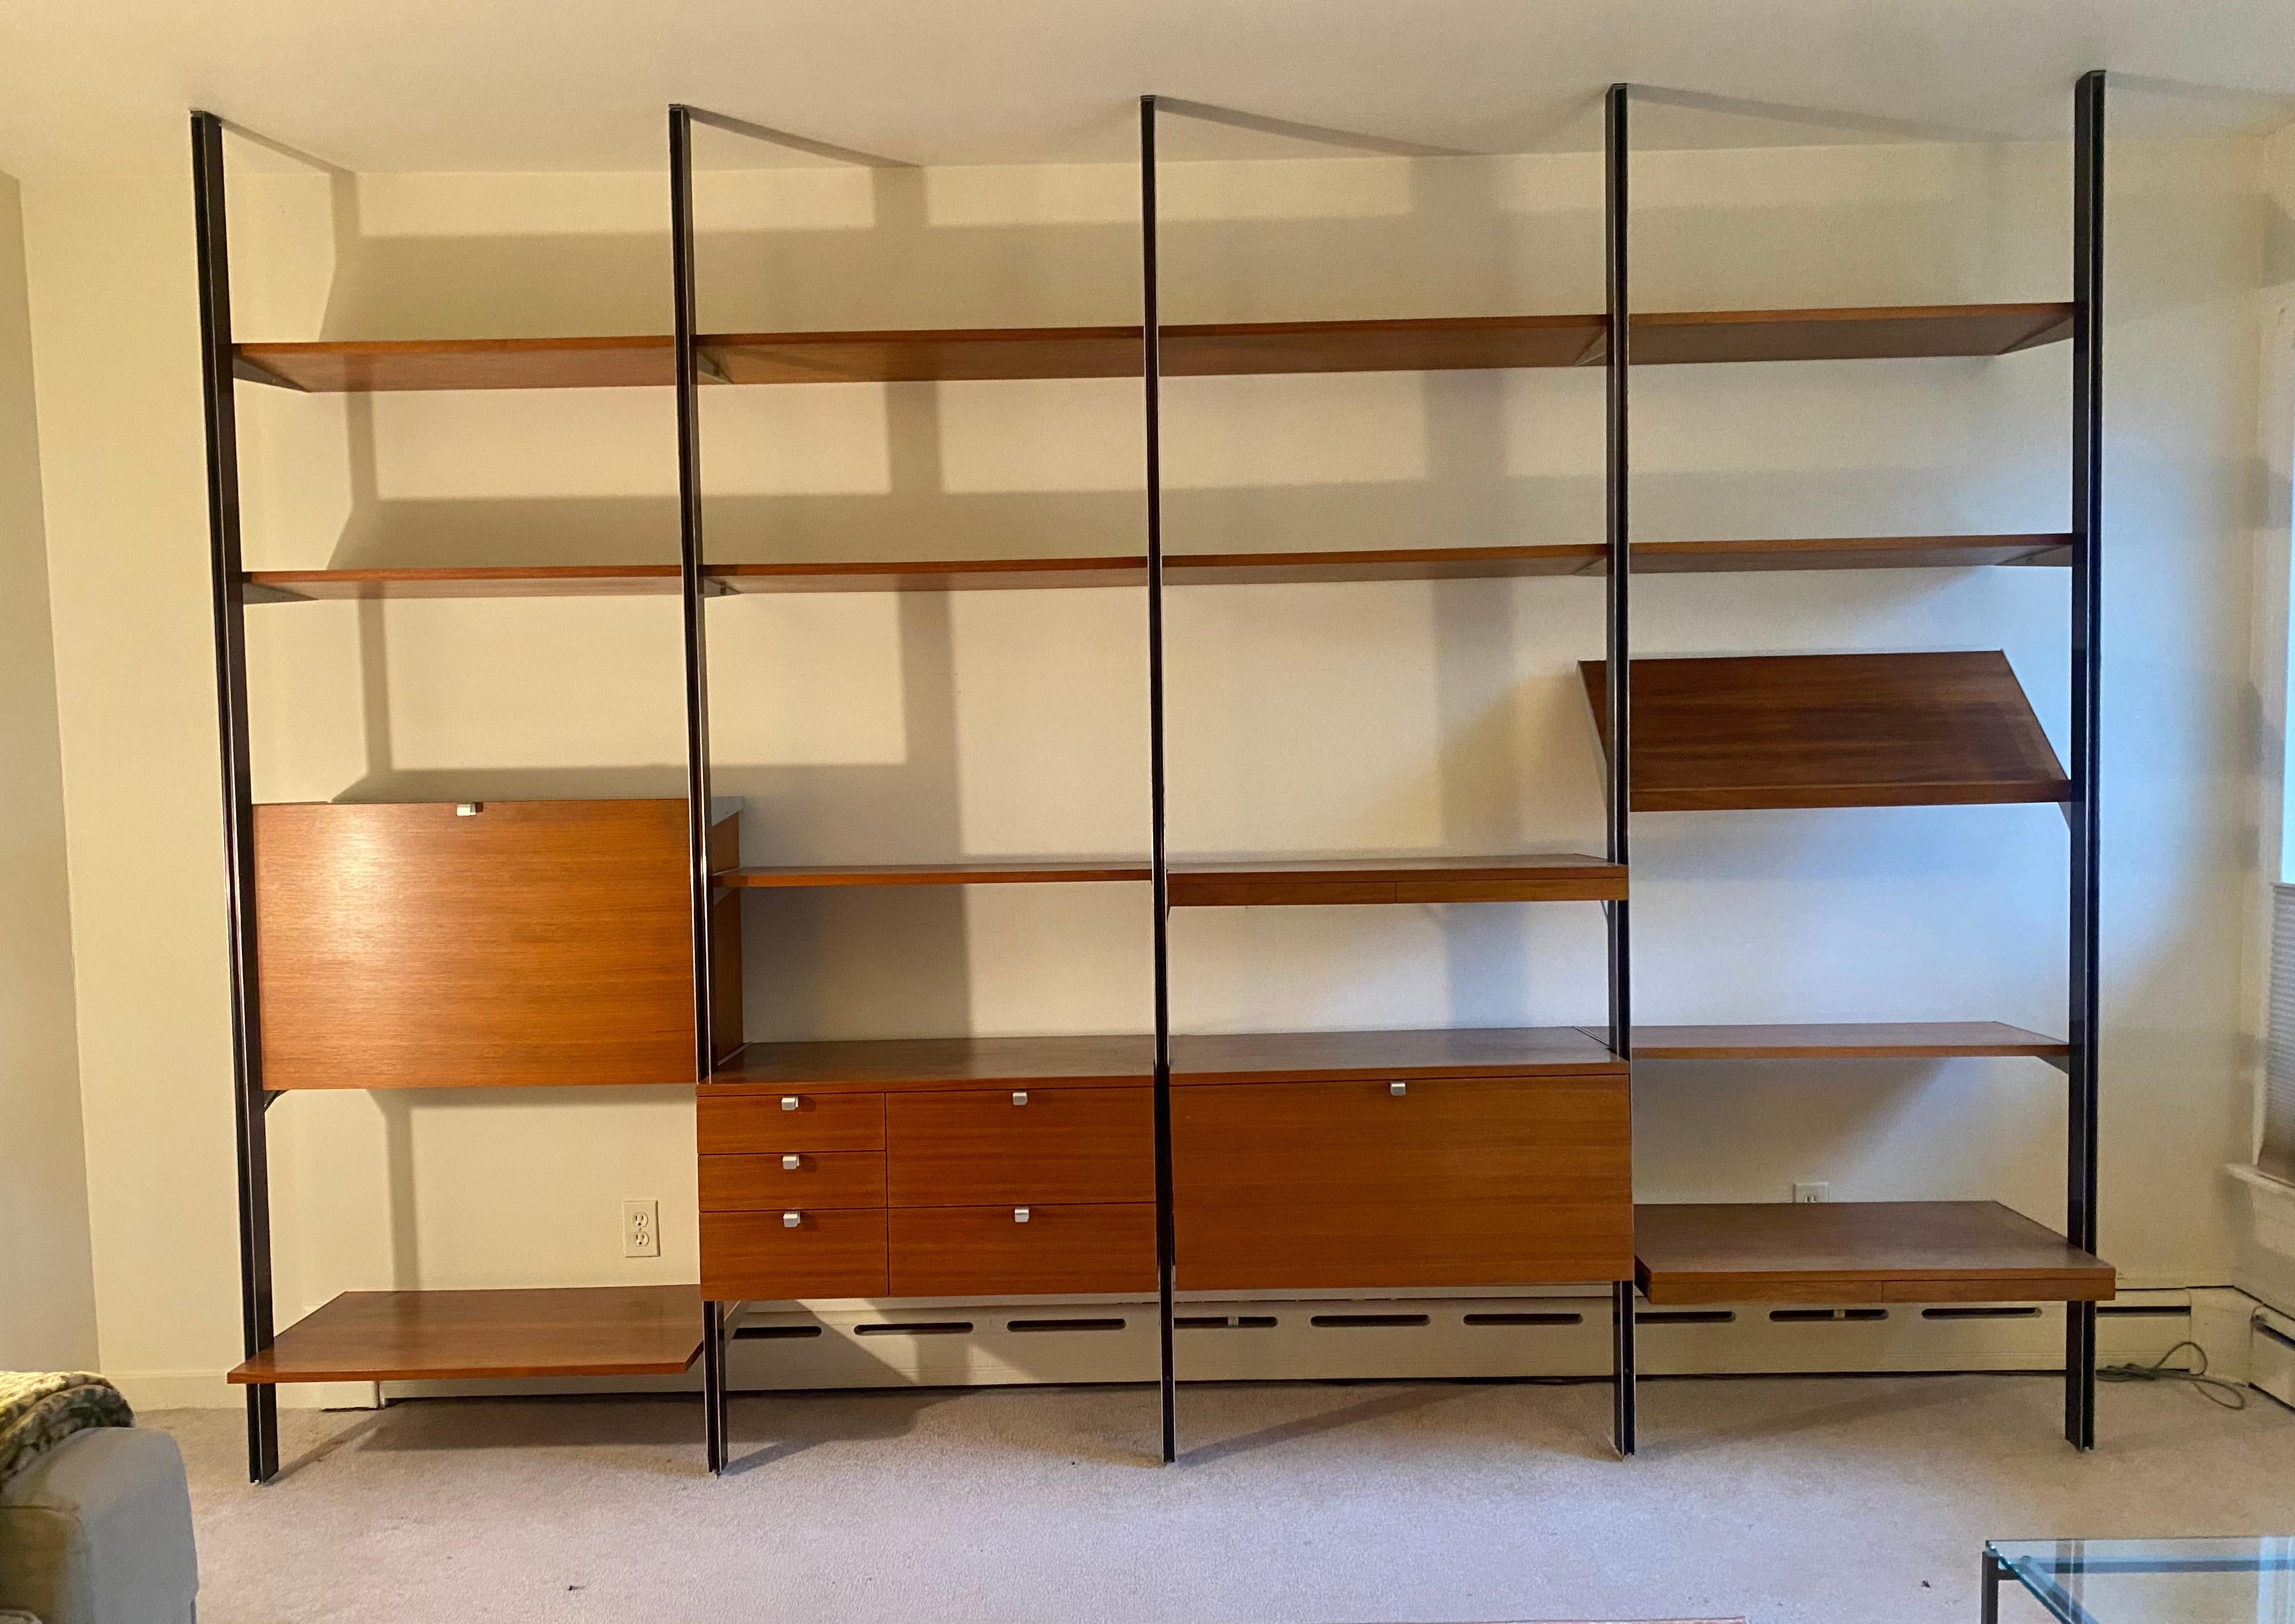 Outstanding and Early George Nelson C S S (comprehensive storage system) ,,manufactured by Herman Miller..4 bAYS consisting of 10 Shelves,,1 tilting book holder....Drop Down Desk with drawers and cubbies,5 drawer cabinet,Pull out turntable cabinet